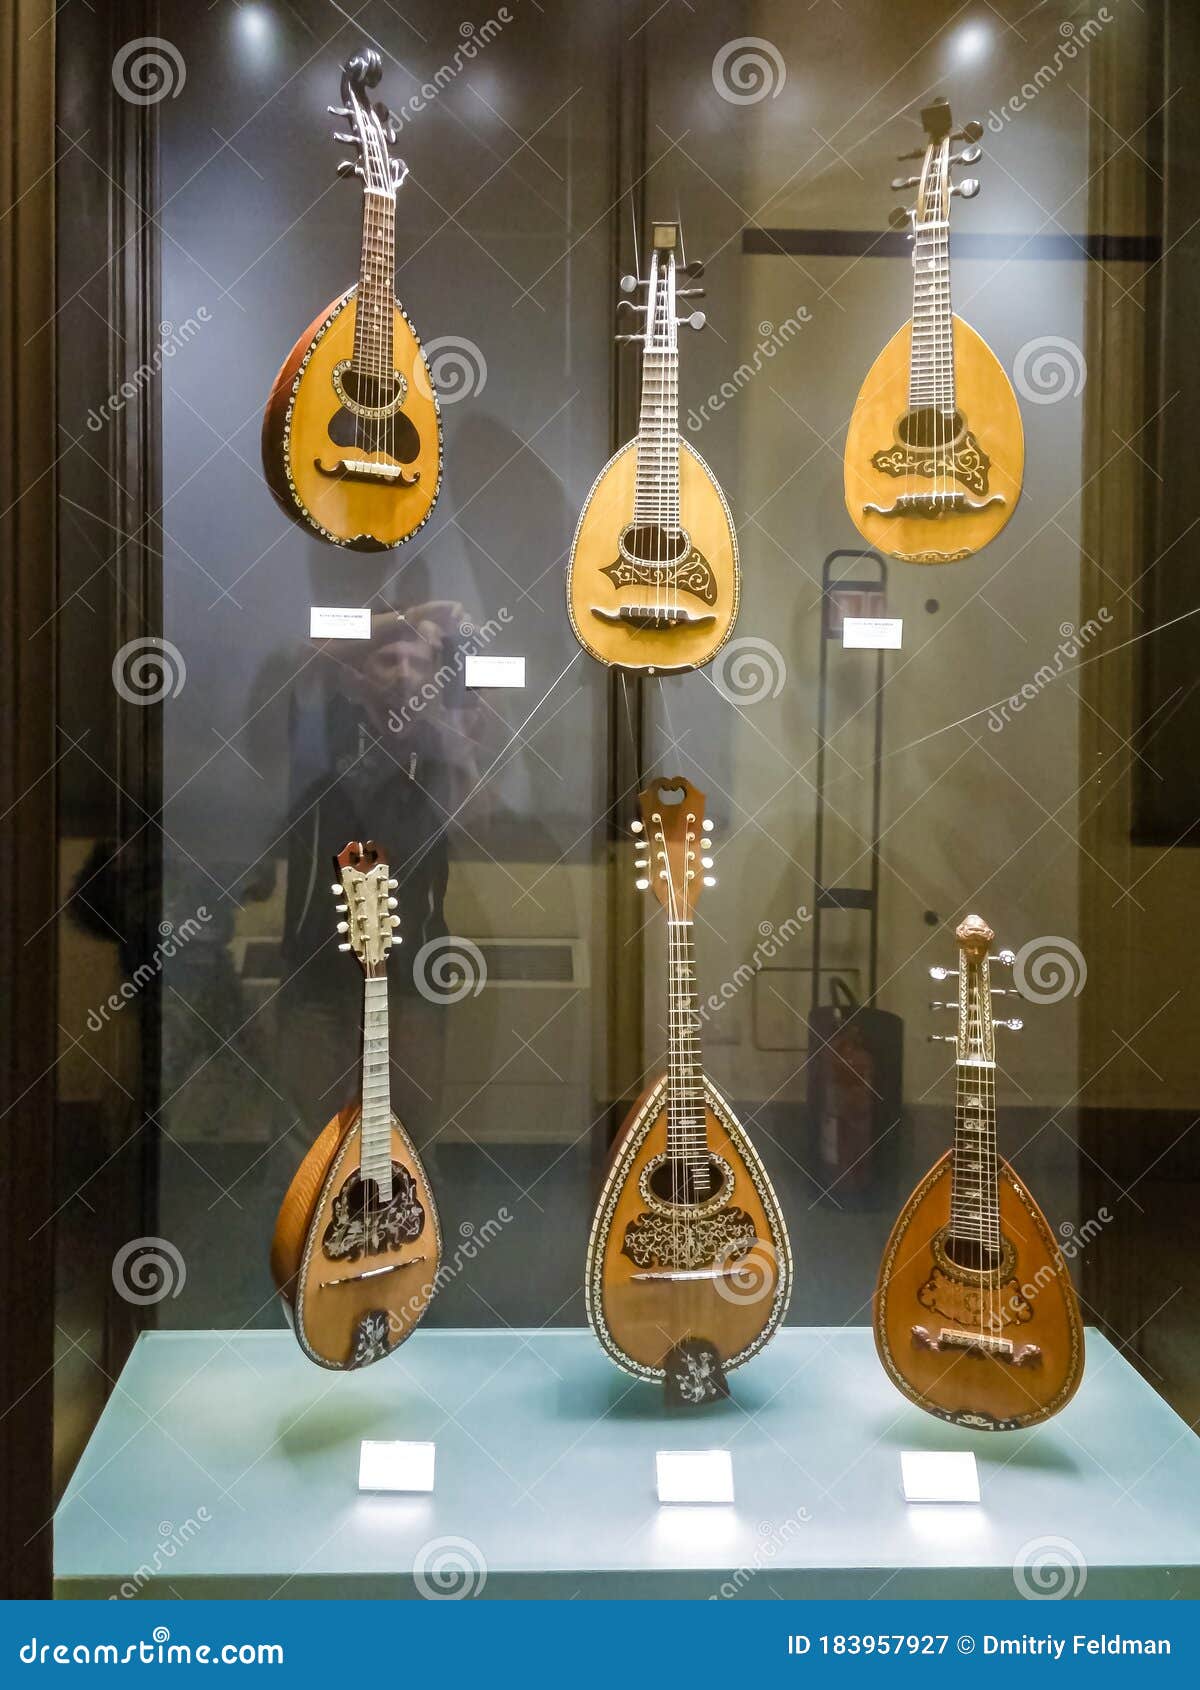 Medieval Stringed Musical Instruments - Mandalins - Exhibit At The ...